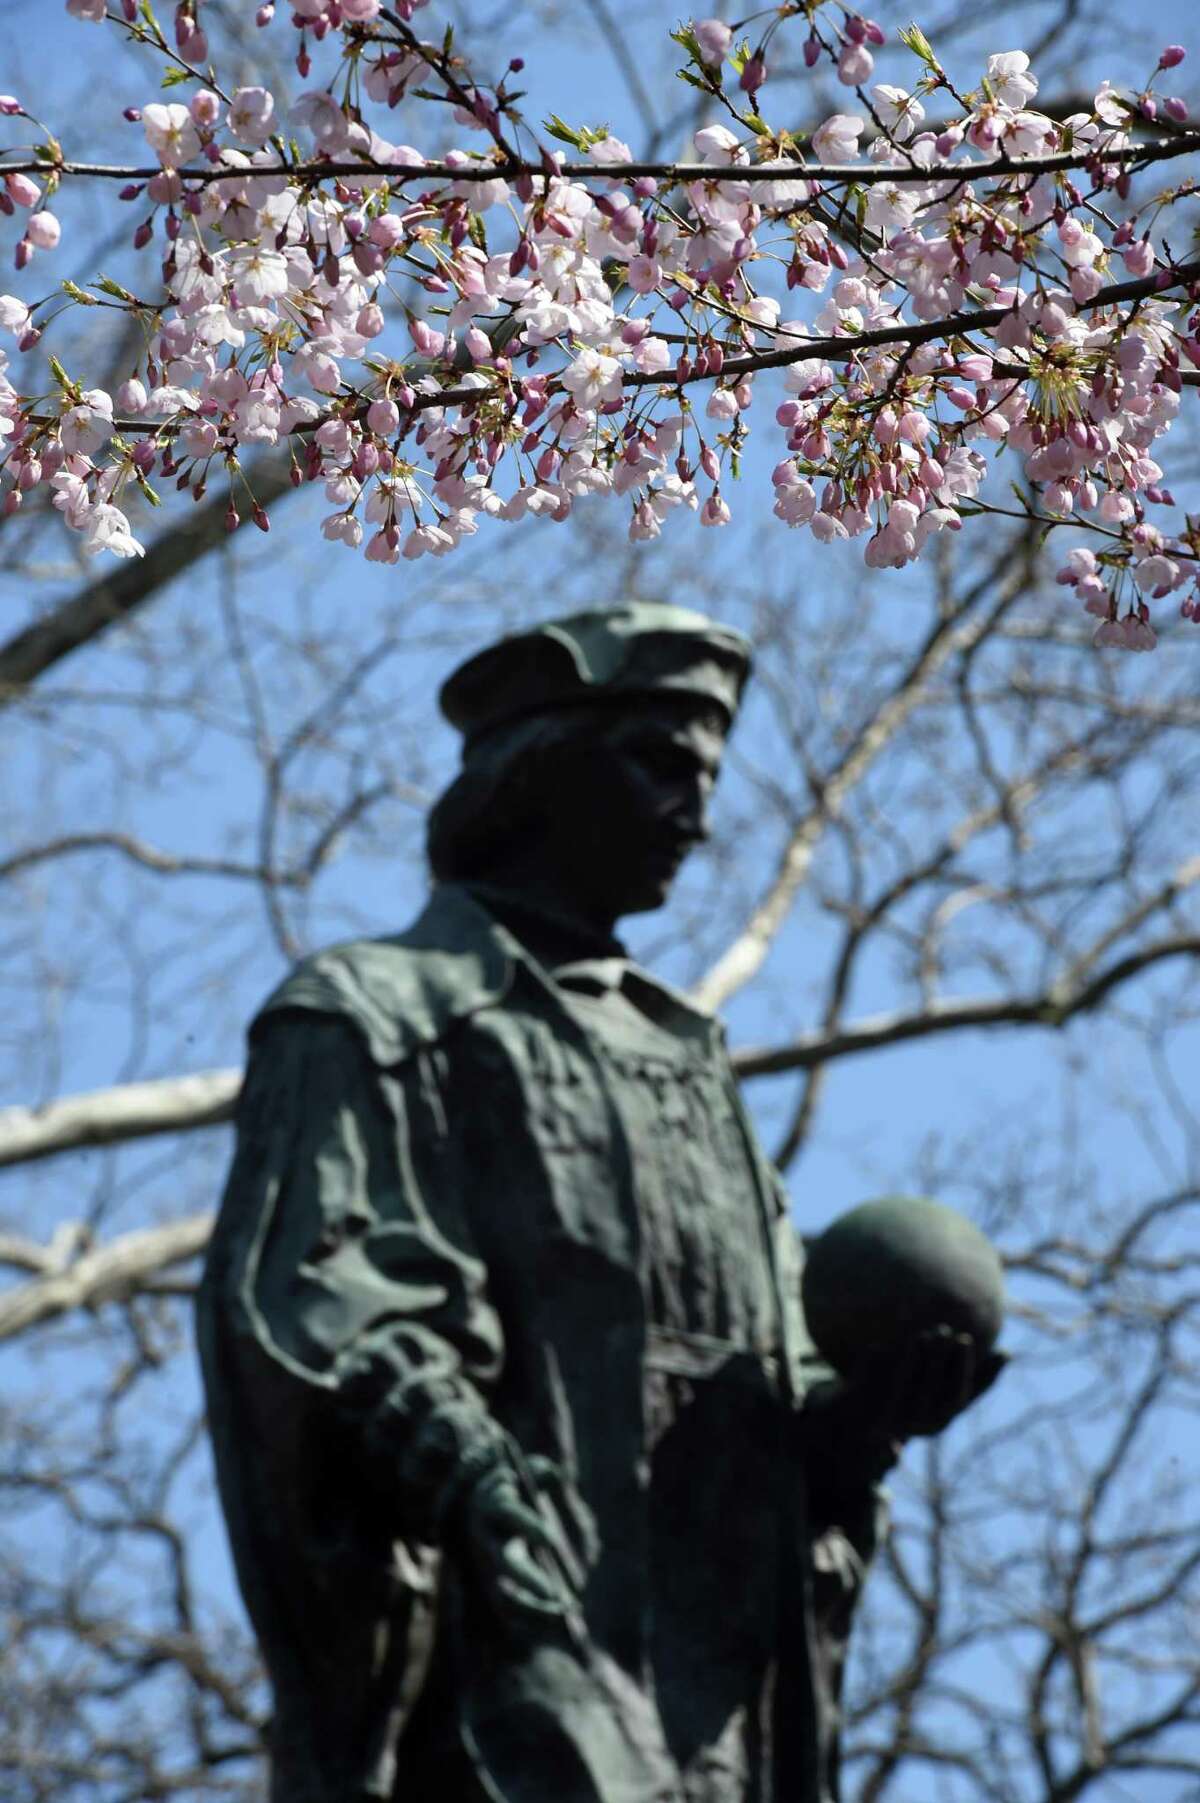 The statue of Christopher Columbus in New Haven’s Wooster Square. The 47th Annual Cherry Blossom Festival planned for Sunday April 19th was canceled in the coronavirus pandemic.